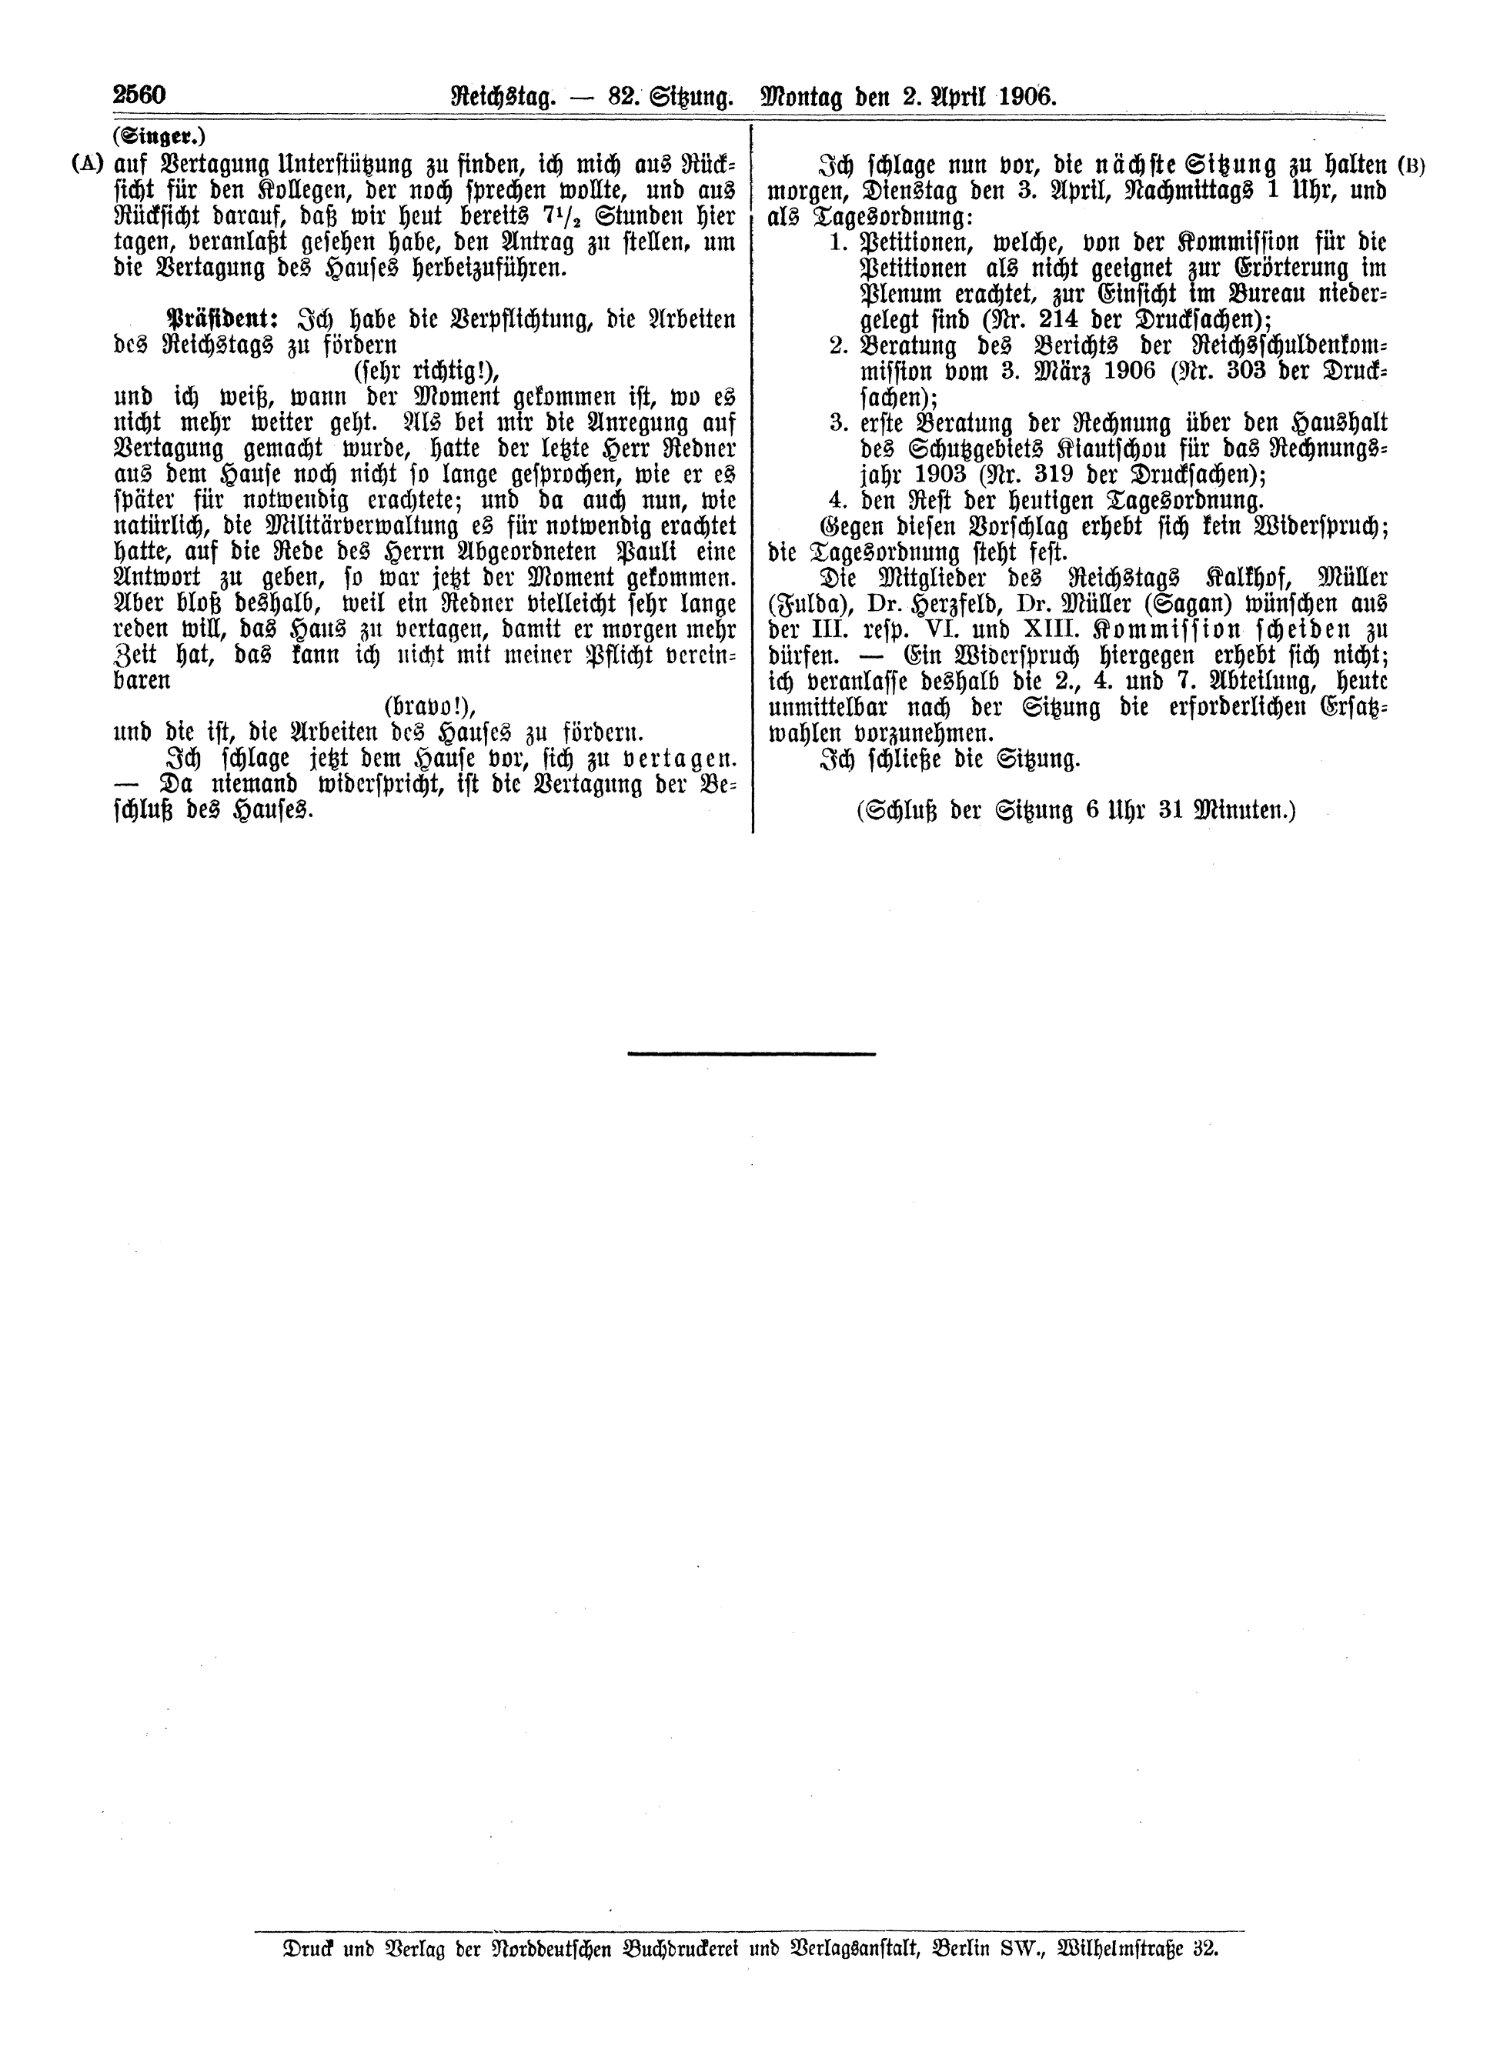 Scan of page 2560